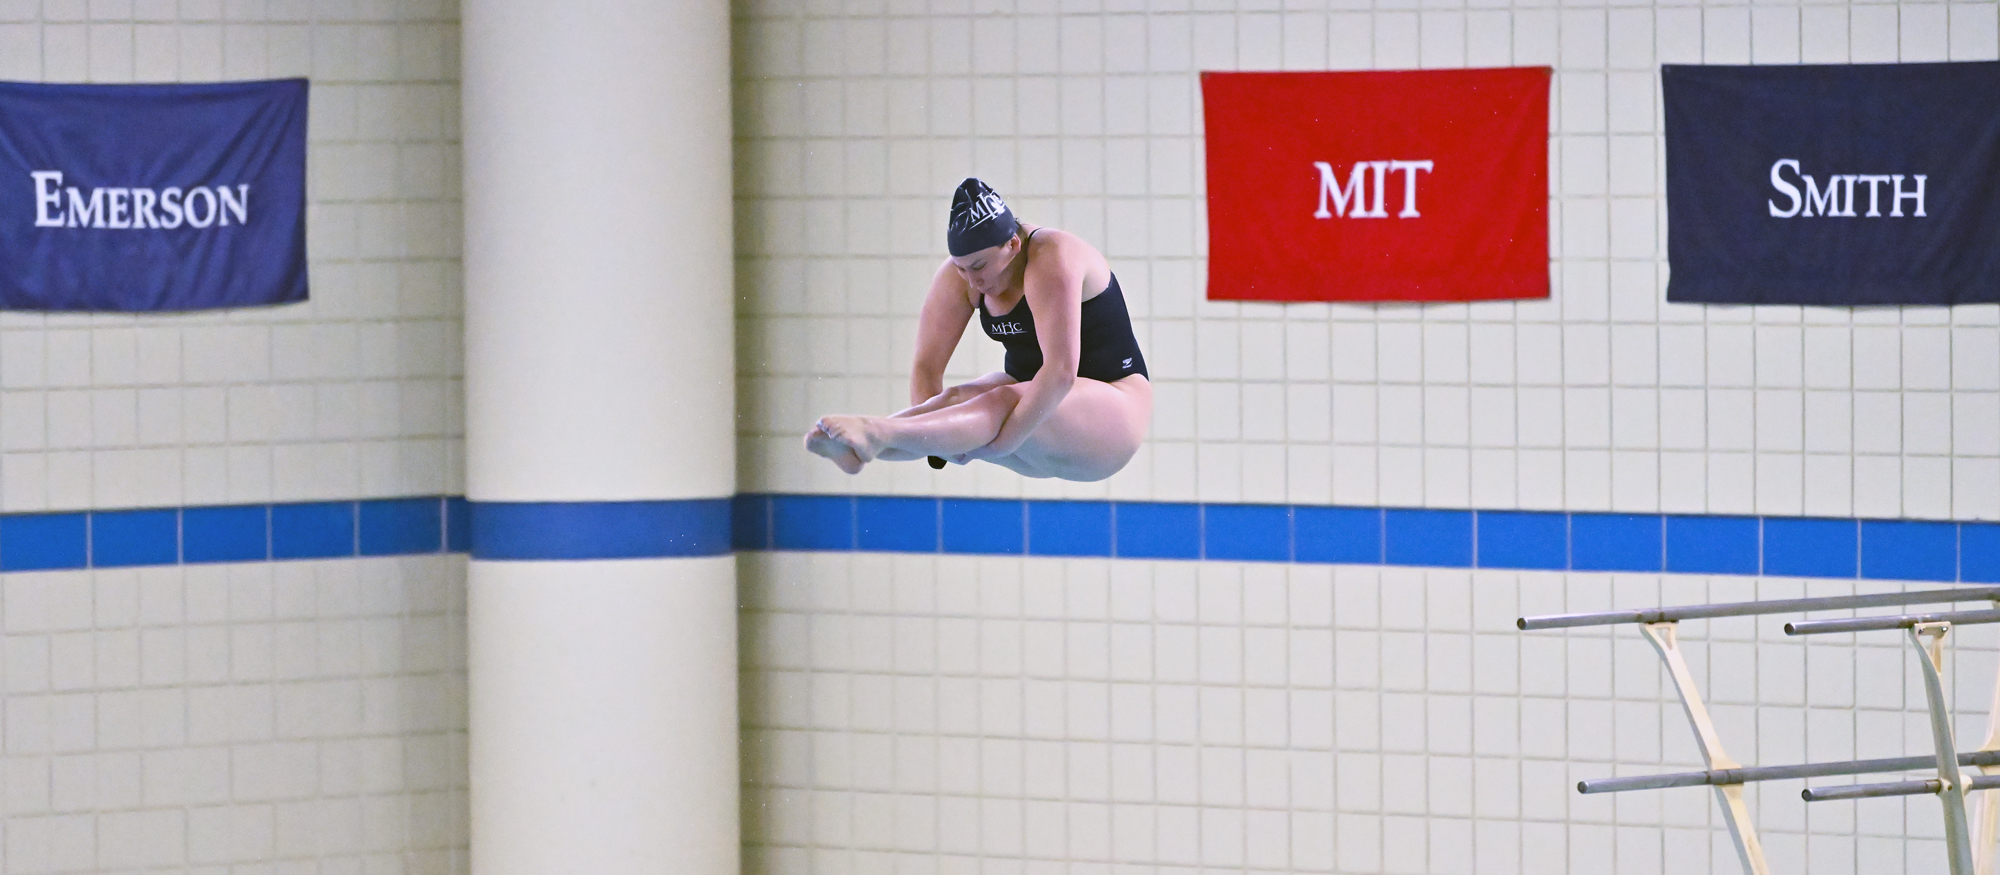 Maddy Sewell scored a career-high 487.90 points on the 3-meter diving board to take fourth place on the final day of the NEWMAC Championships at MIT on Feb. 24, 2024. (RJB Sports file photo)